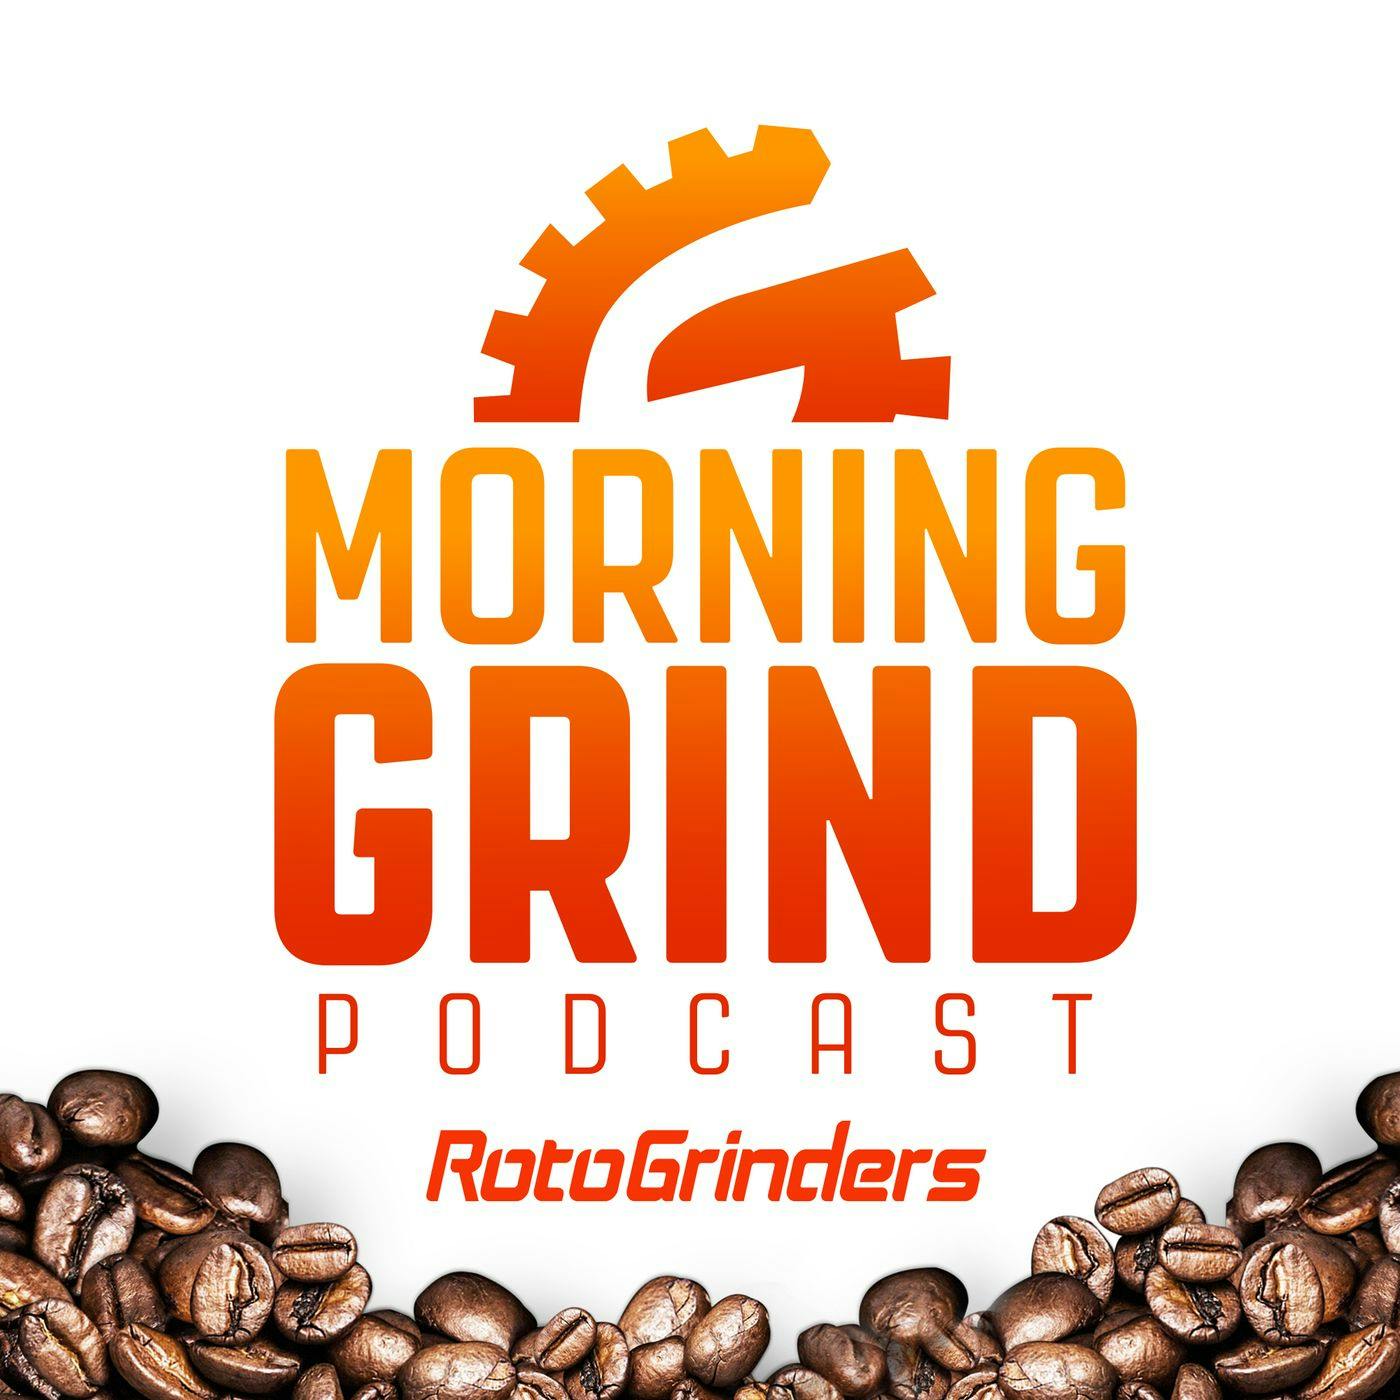 MLB Morning Grind: 8/23/2021 - Why Is He The Highest Priced Pitcher